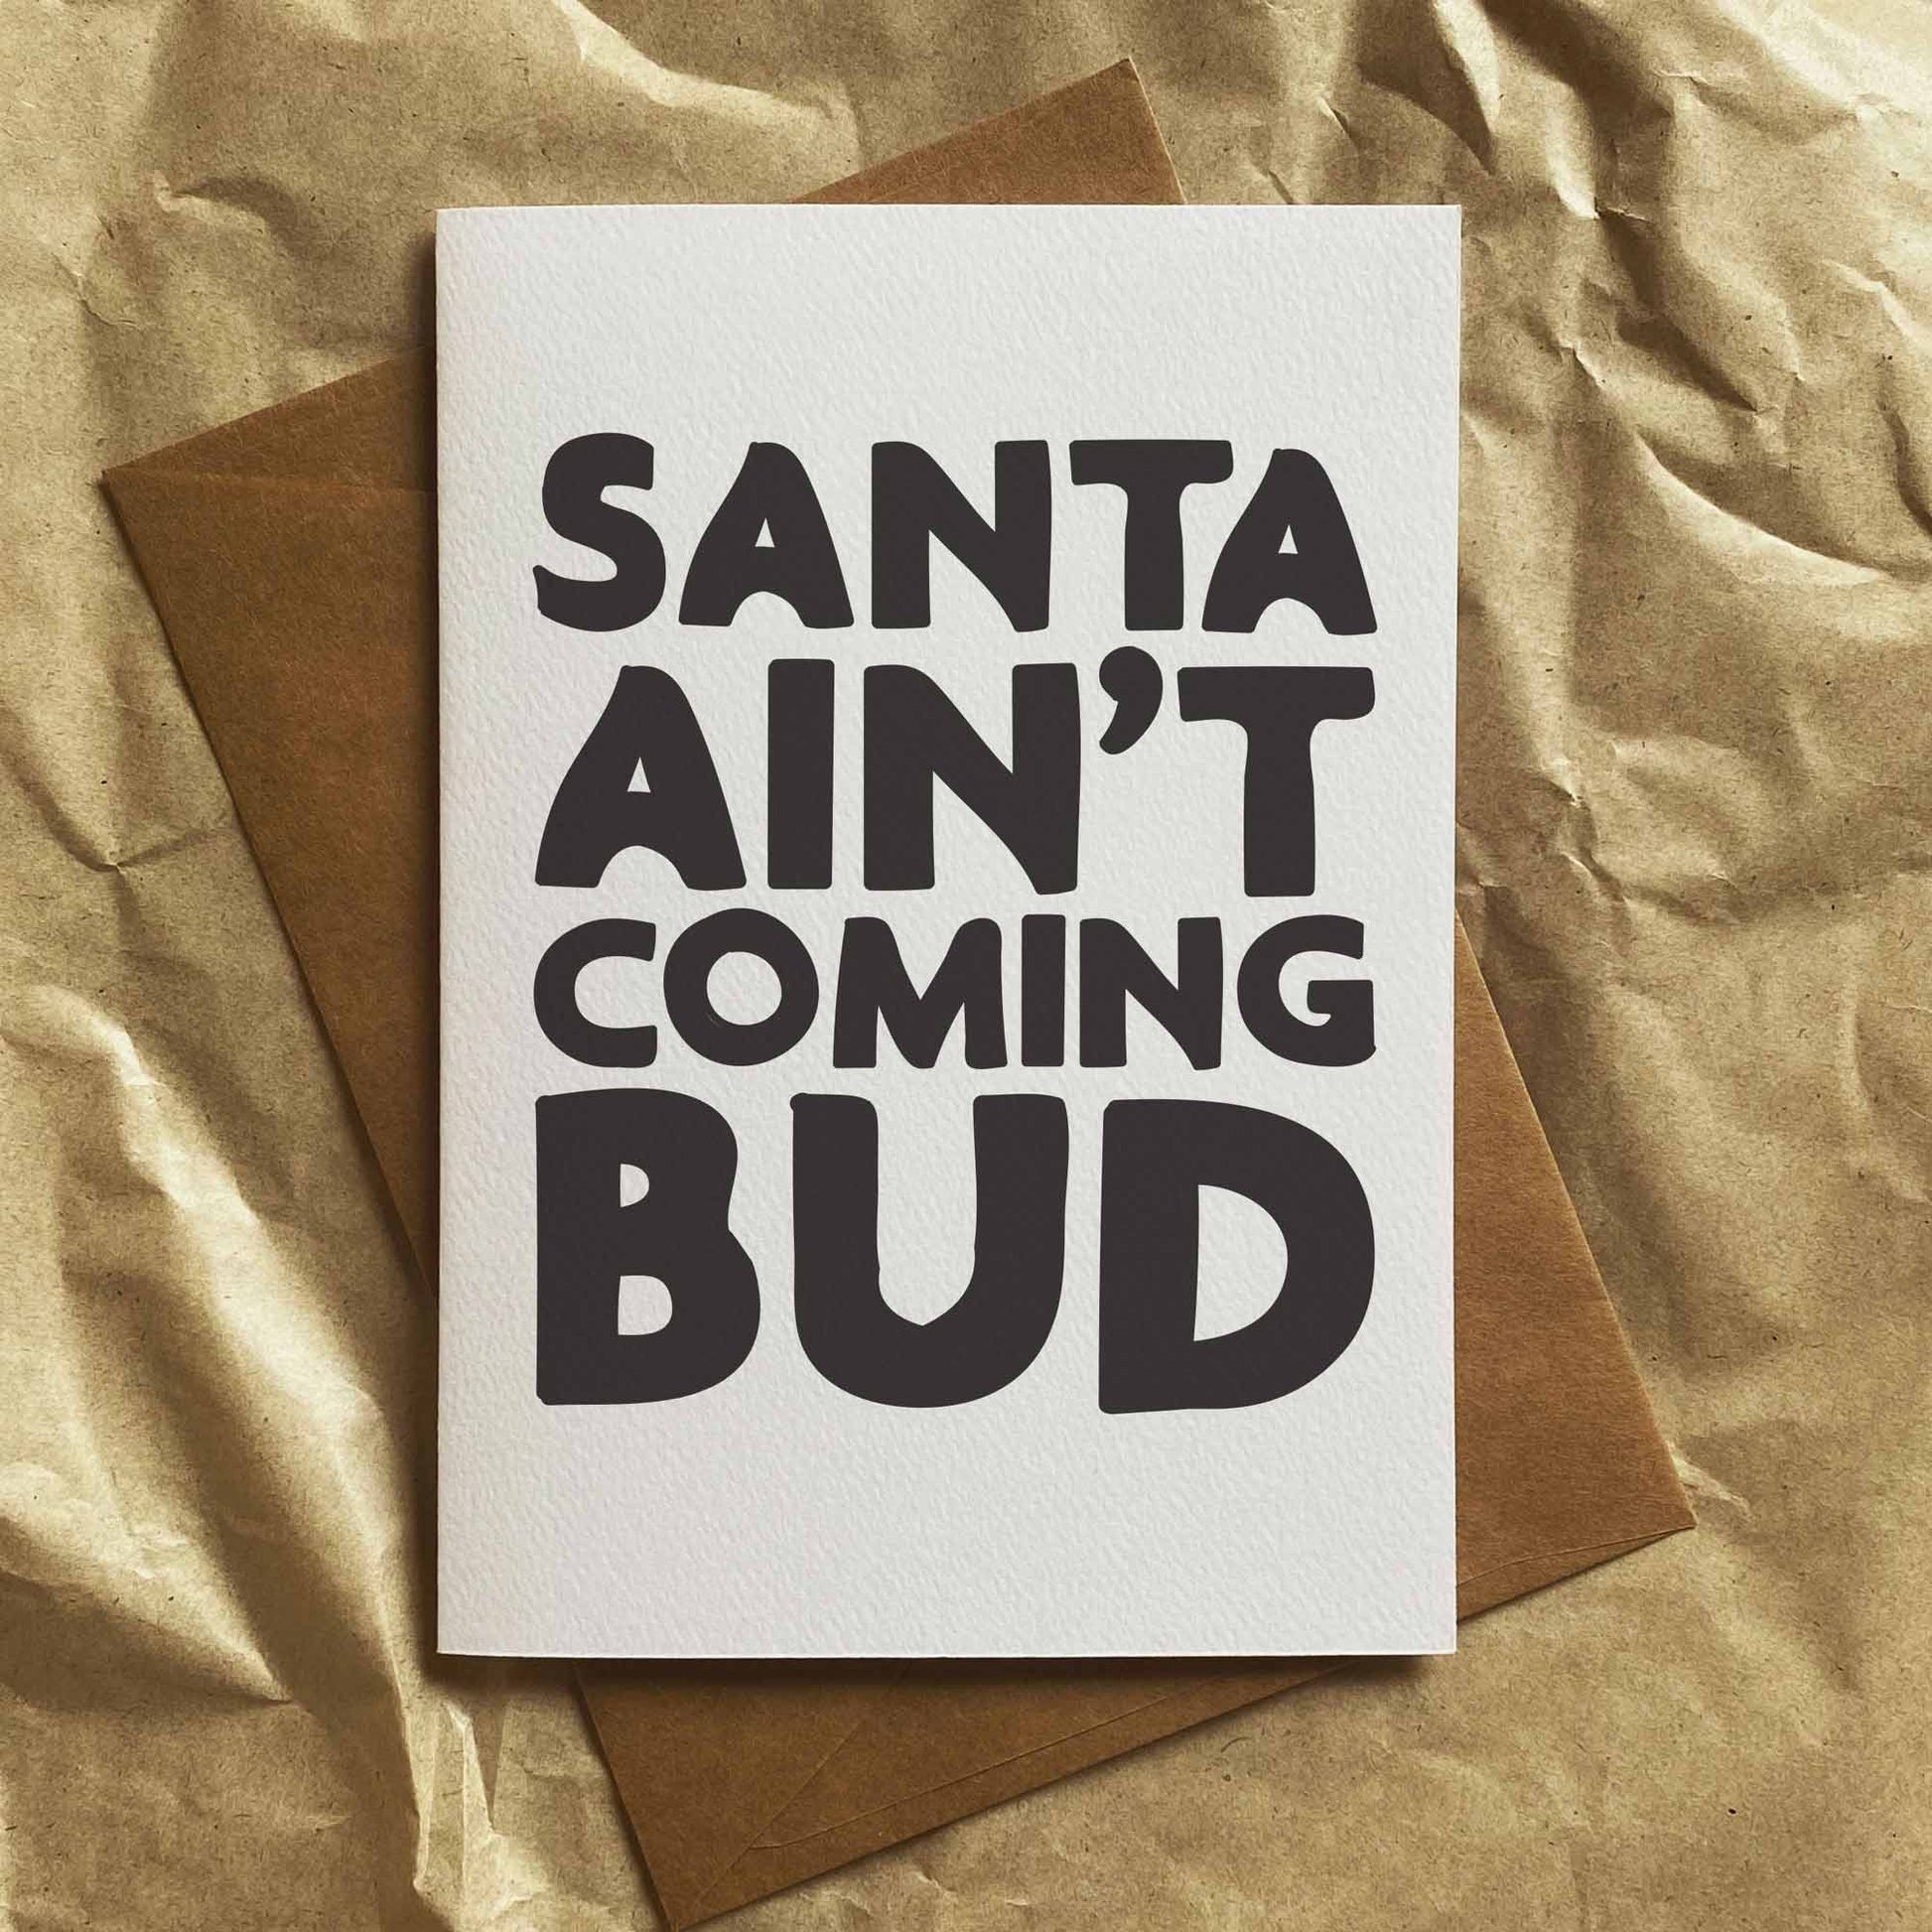 Funny Christmas Card - Santa Ain't Coming Bud - Black And White Designer Greeting Card By Sheridan Eveline